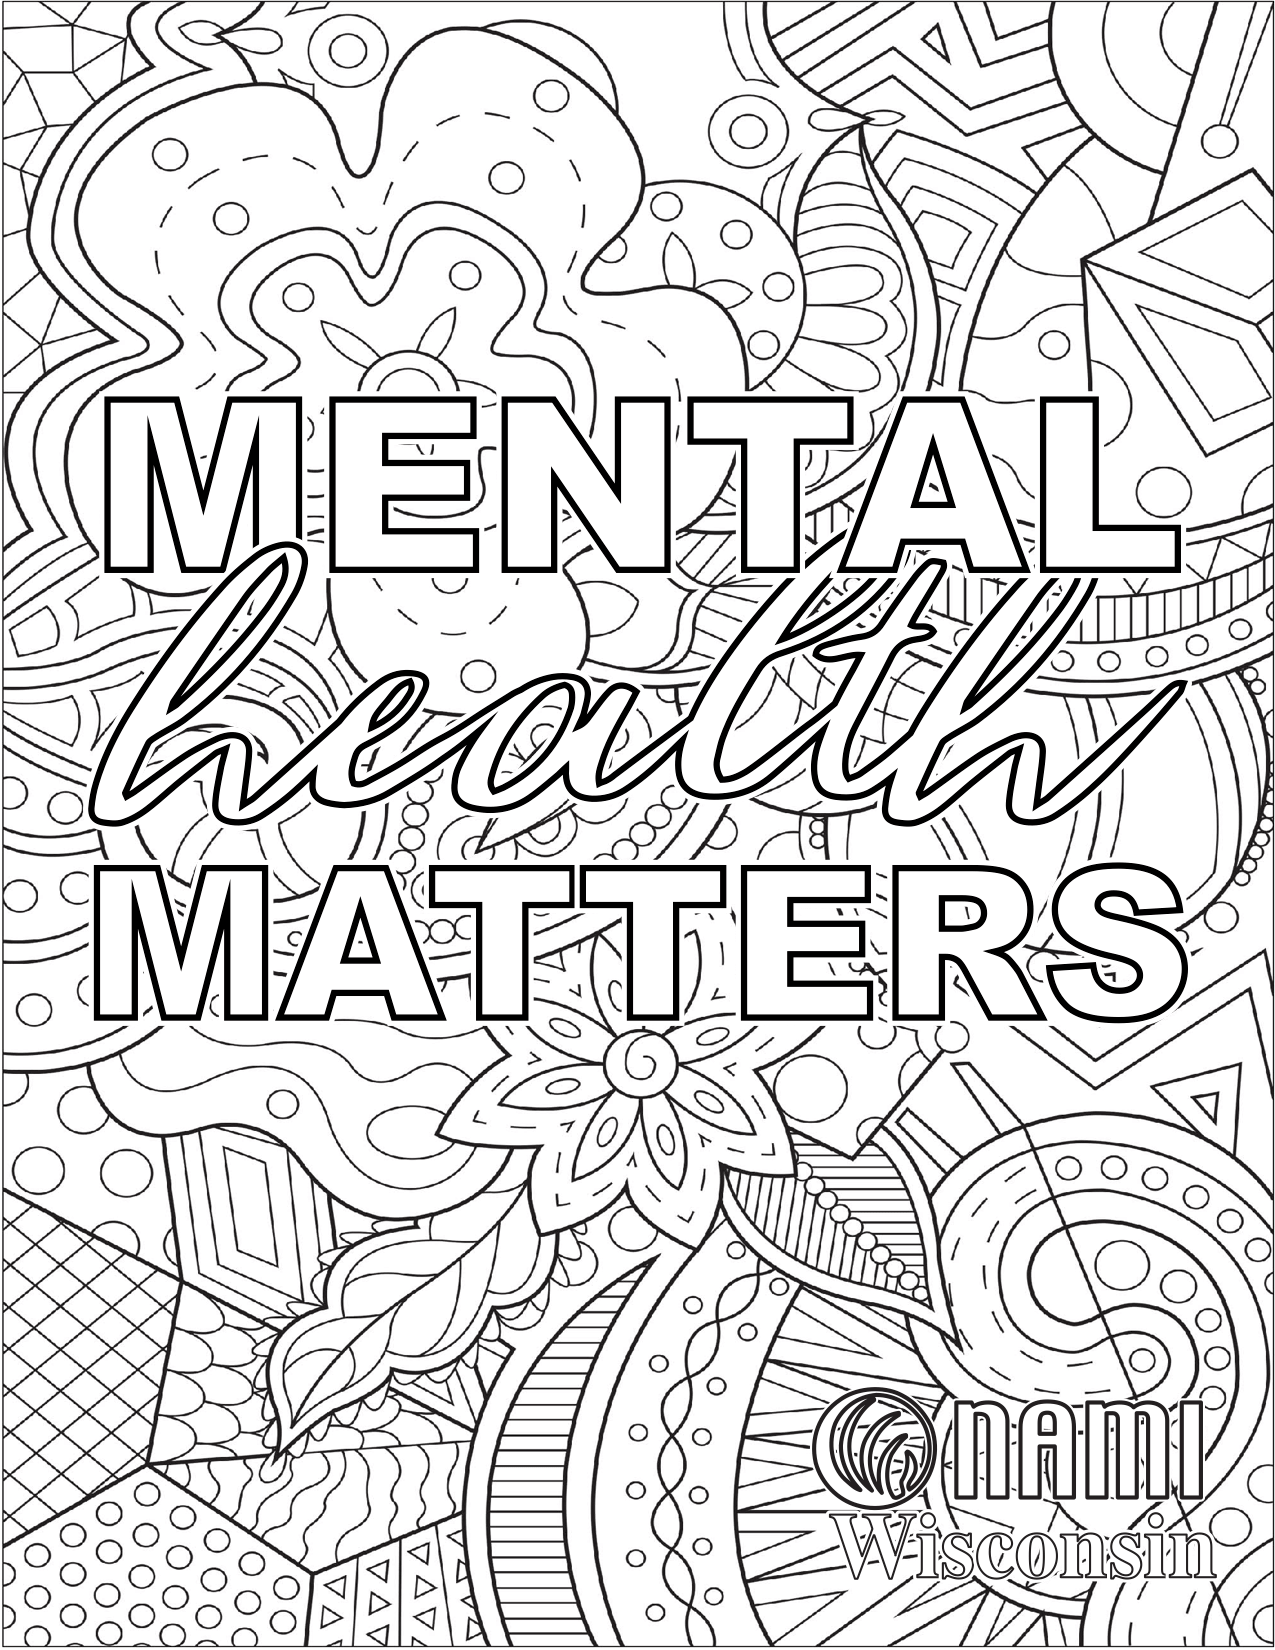 Mental Health Matters | Coloring Home | preschool coloring pages pdf